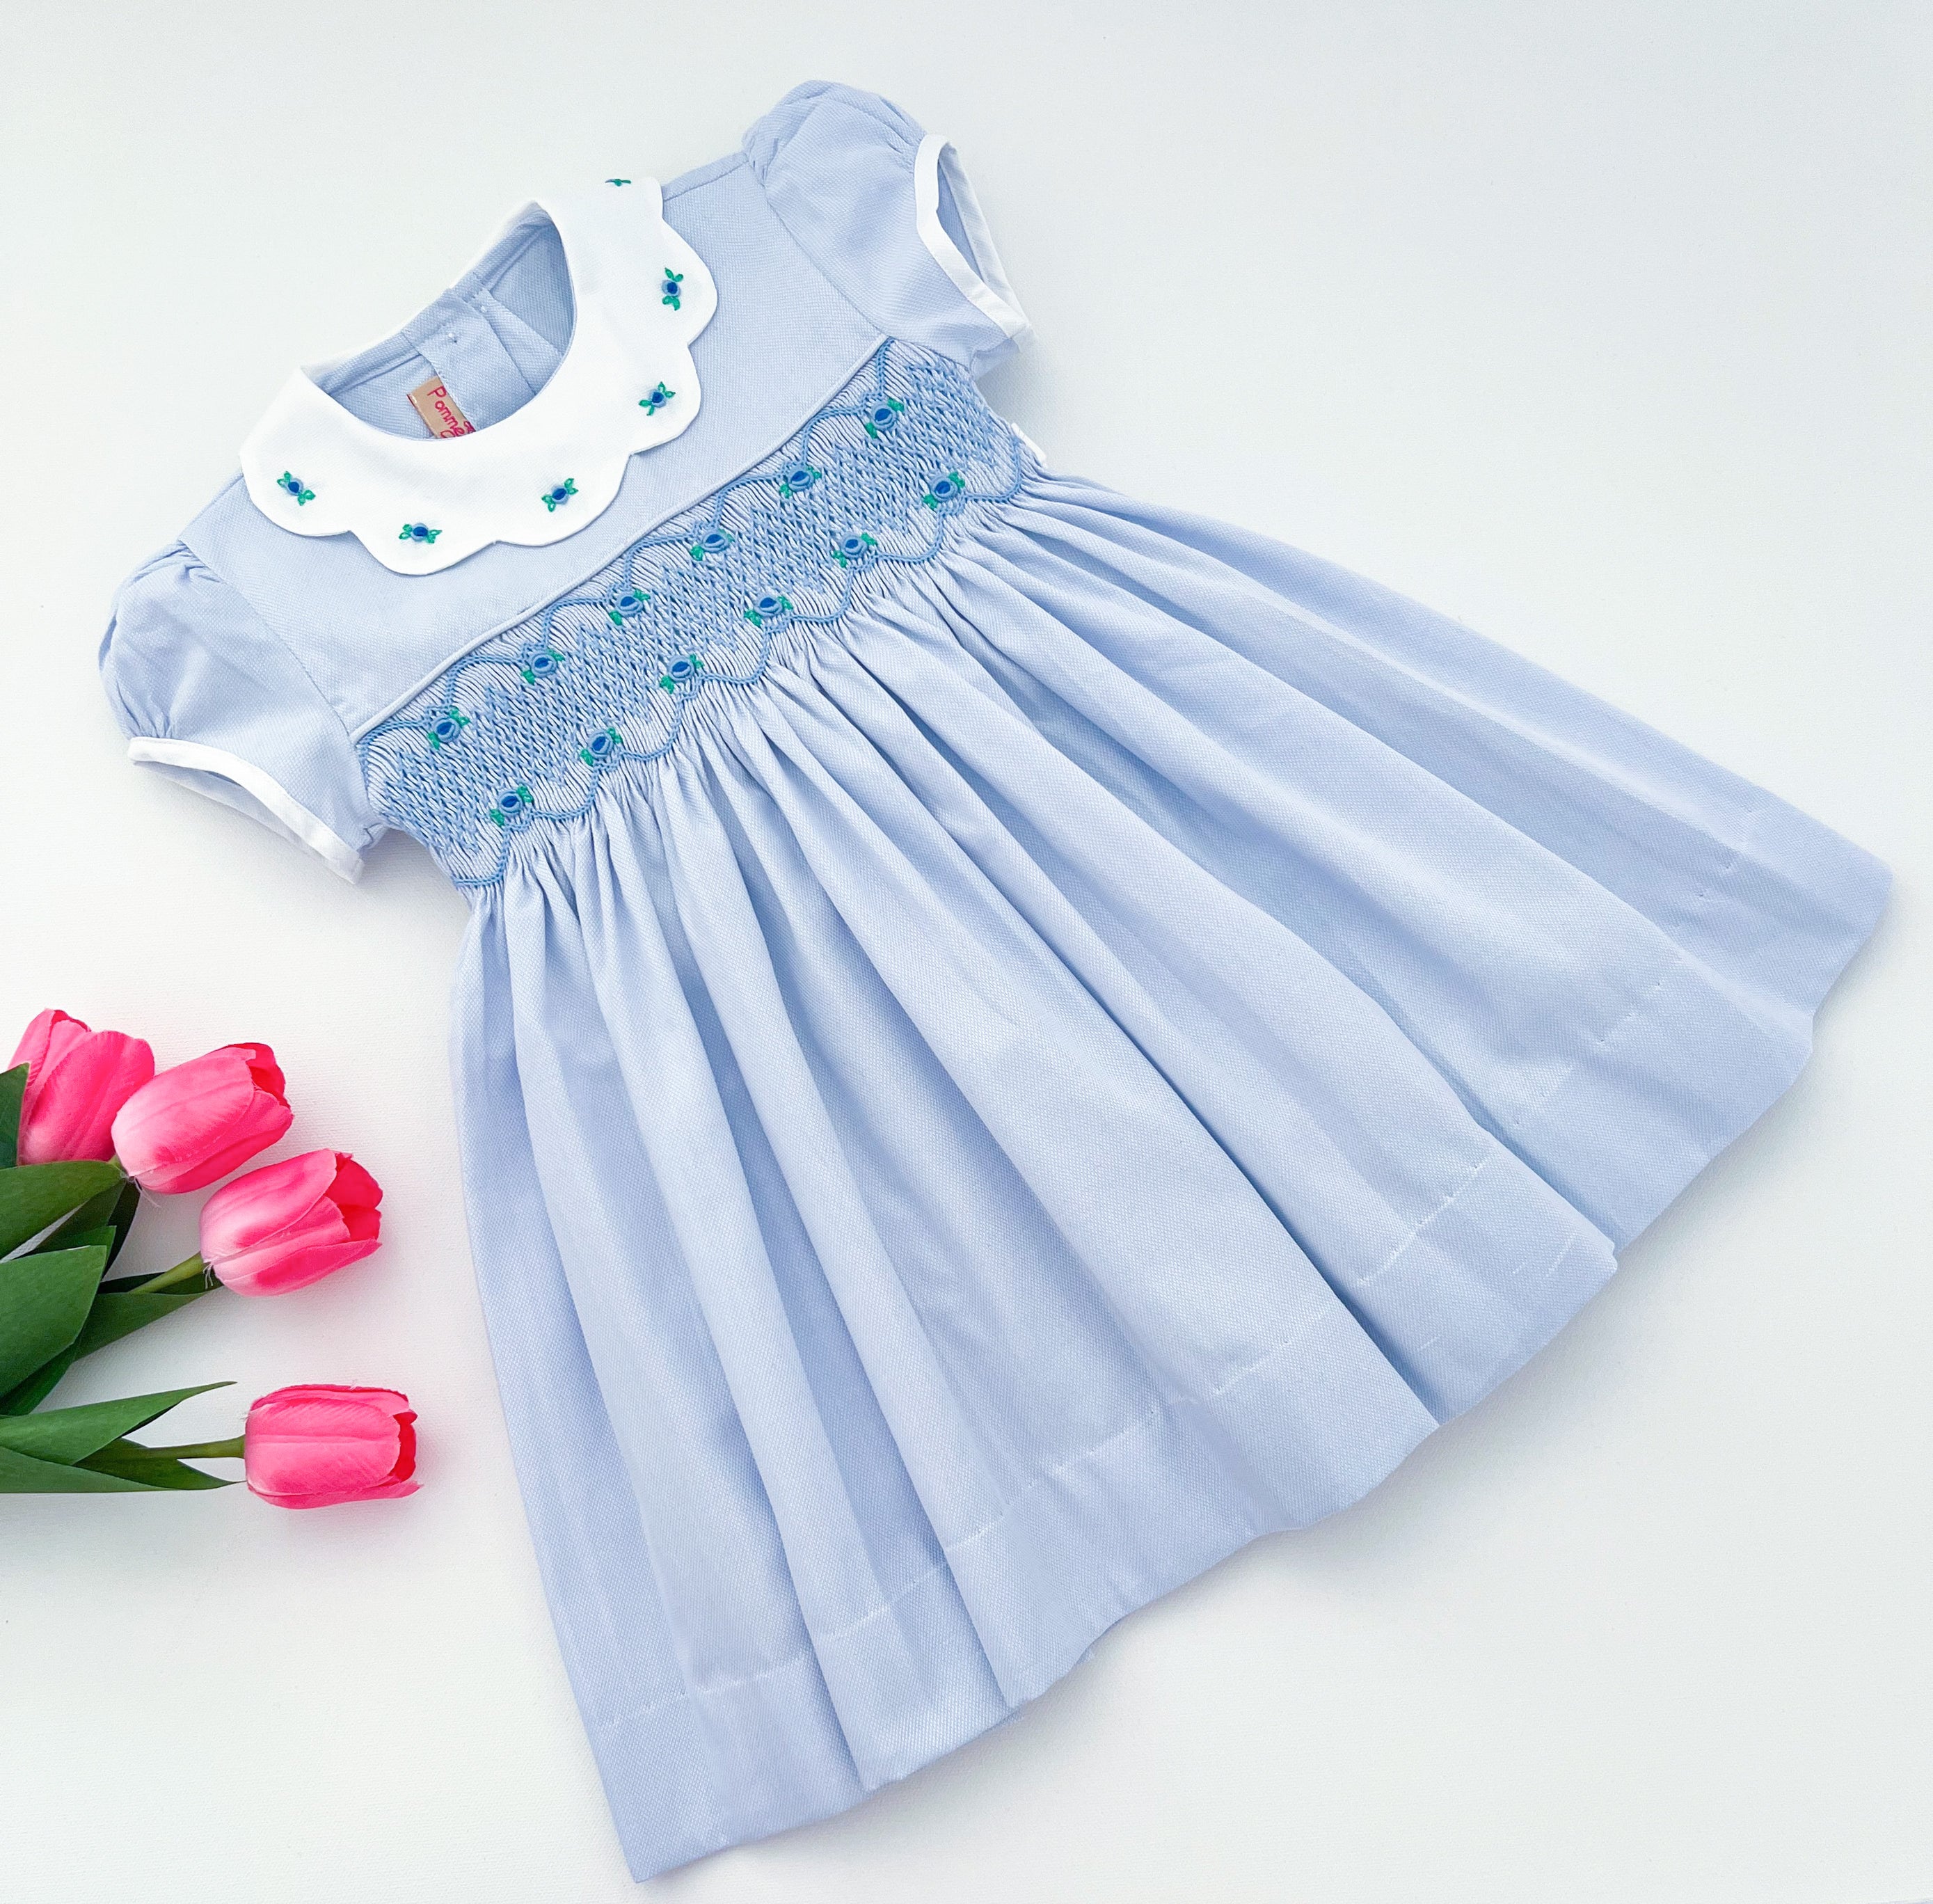 The hand smocked GRACE dress - in blue